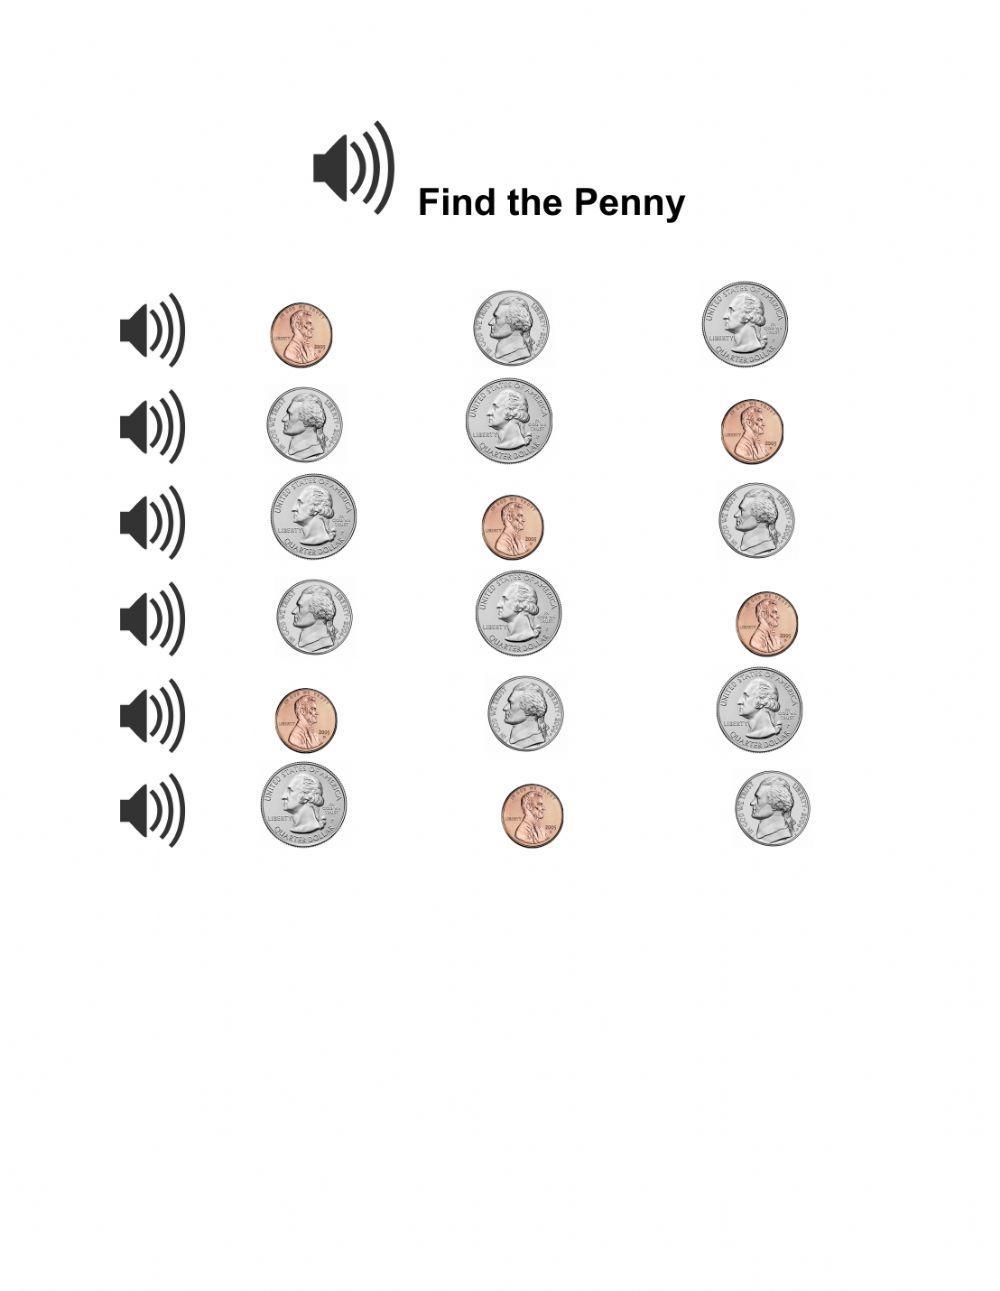 Find the penny